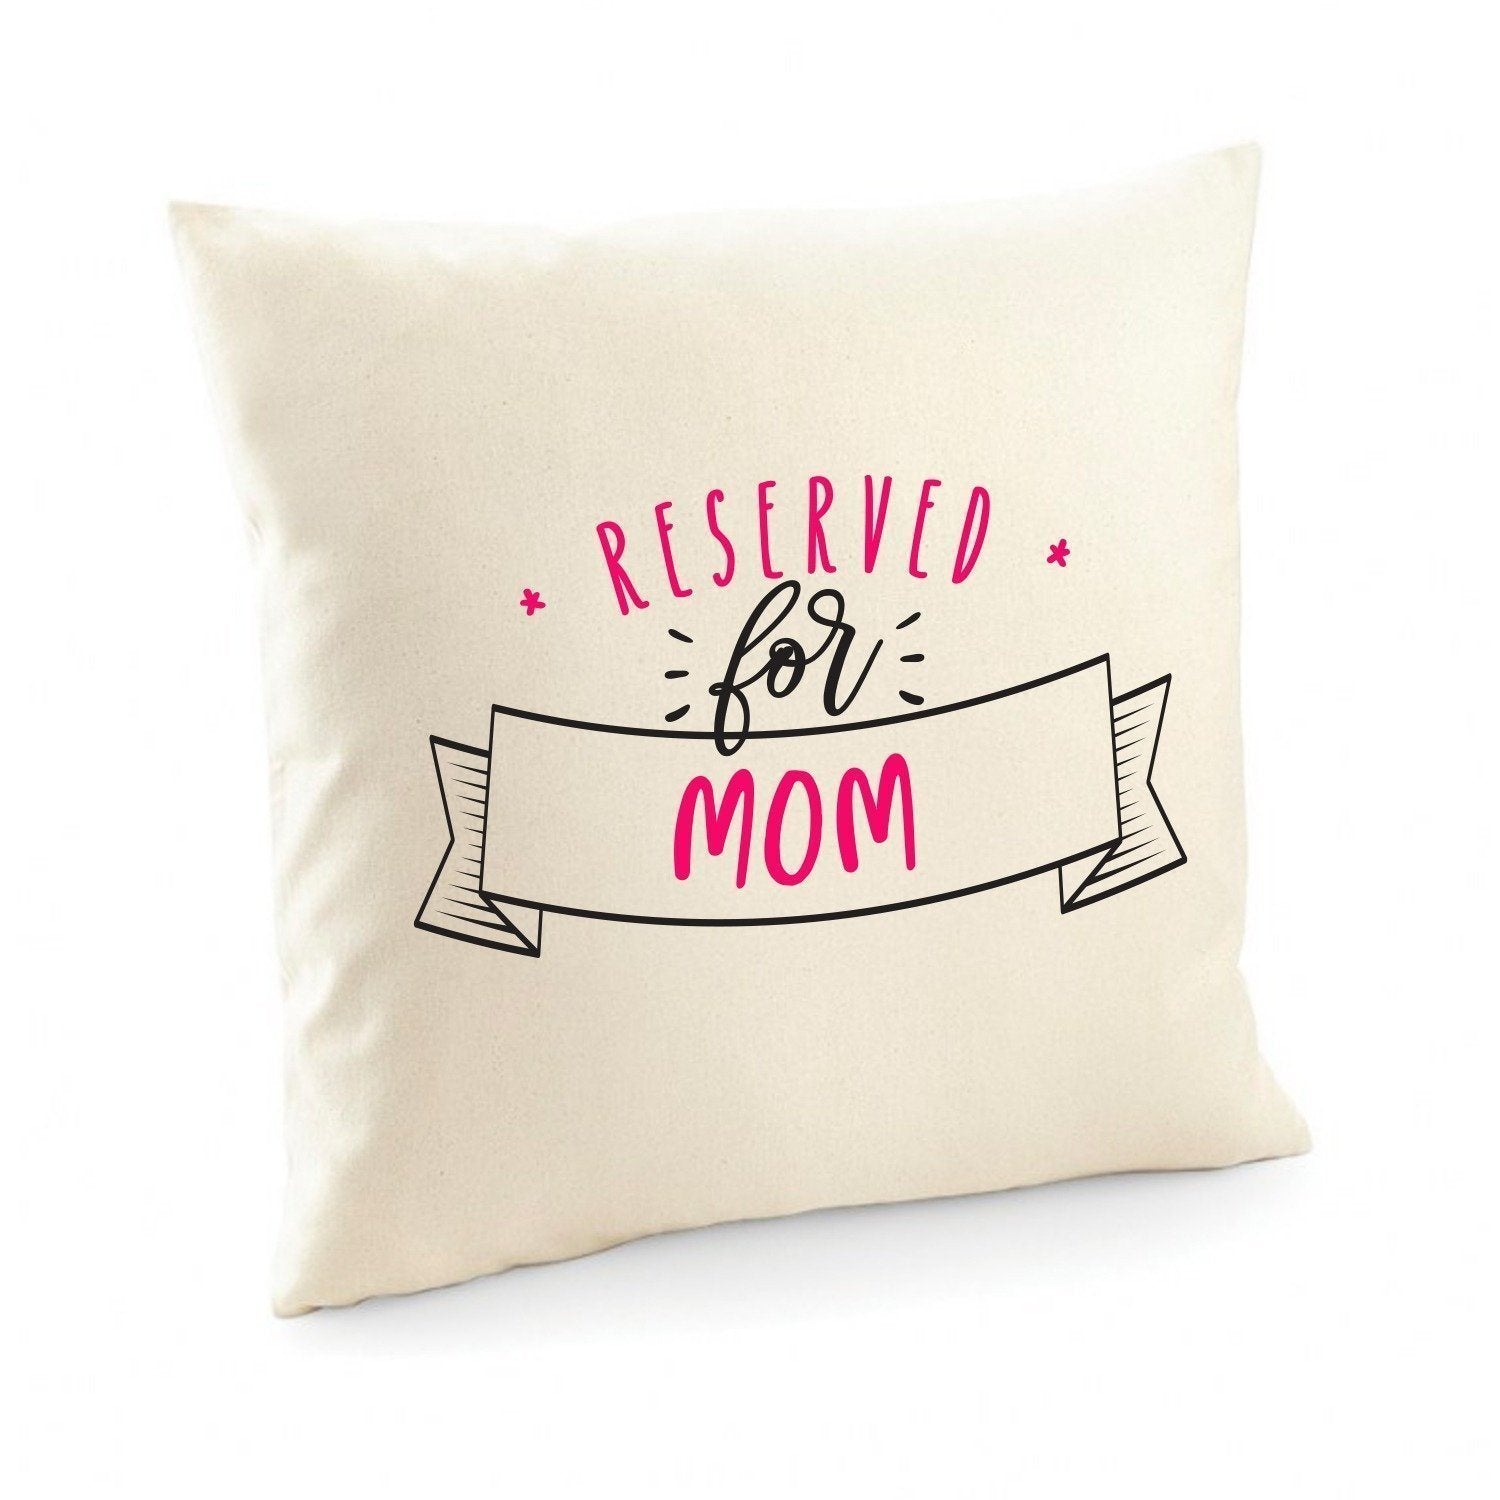 Reserved for mom cushion cover, Personalised Mother's Day Gift with names